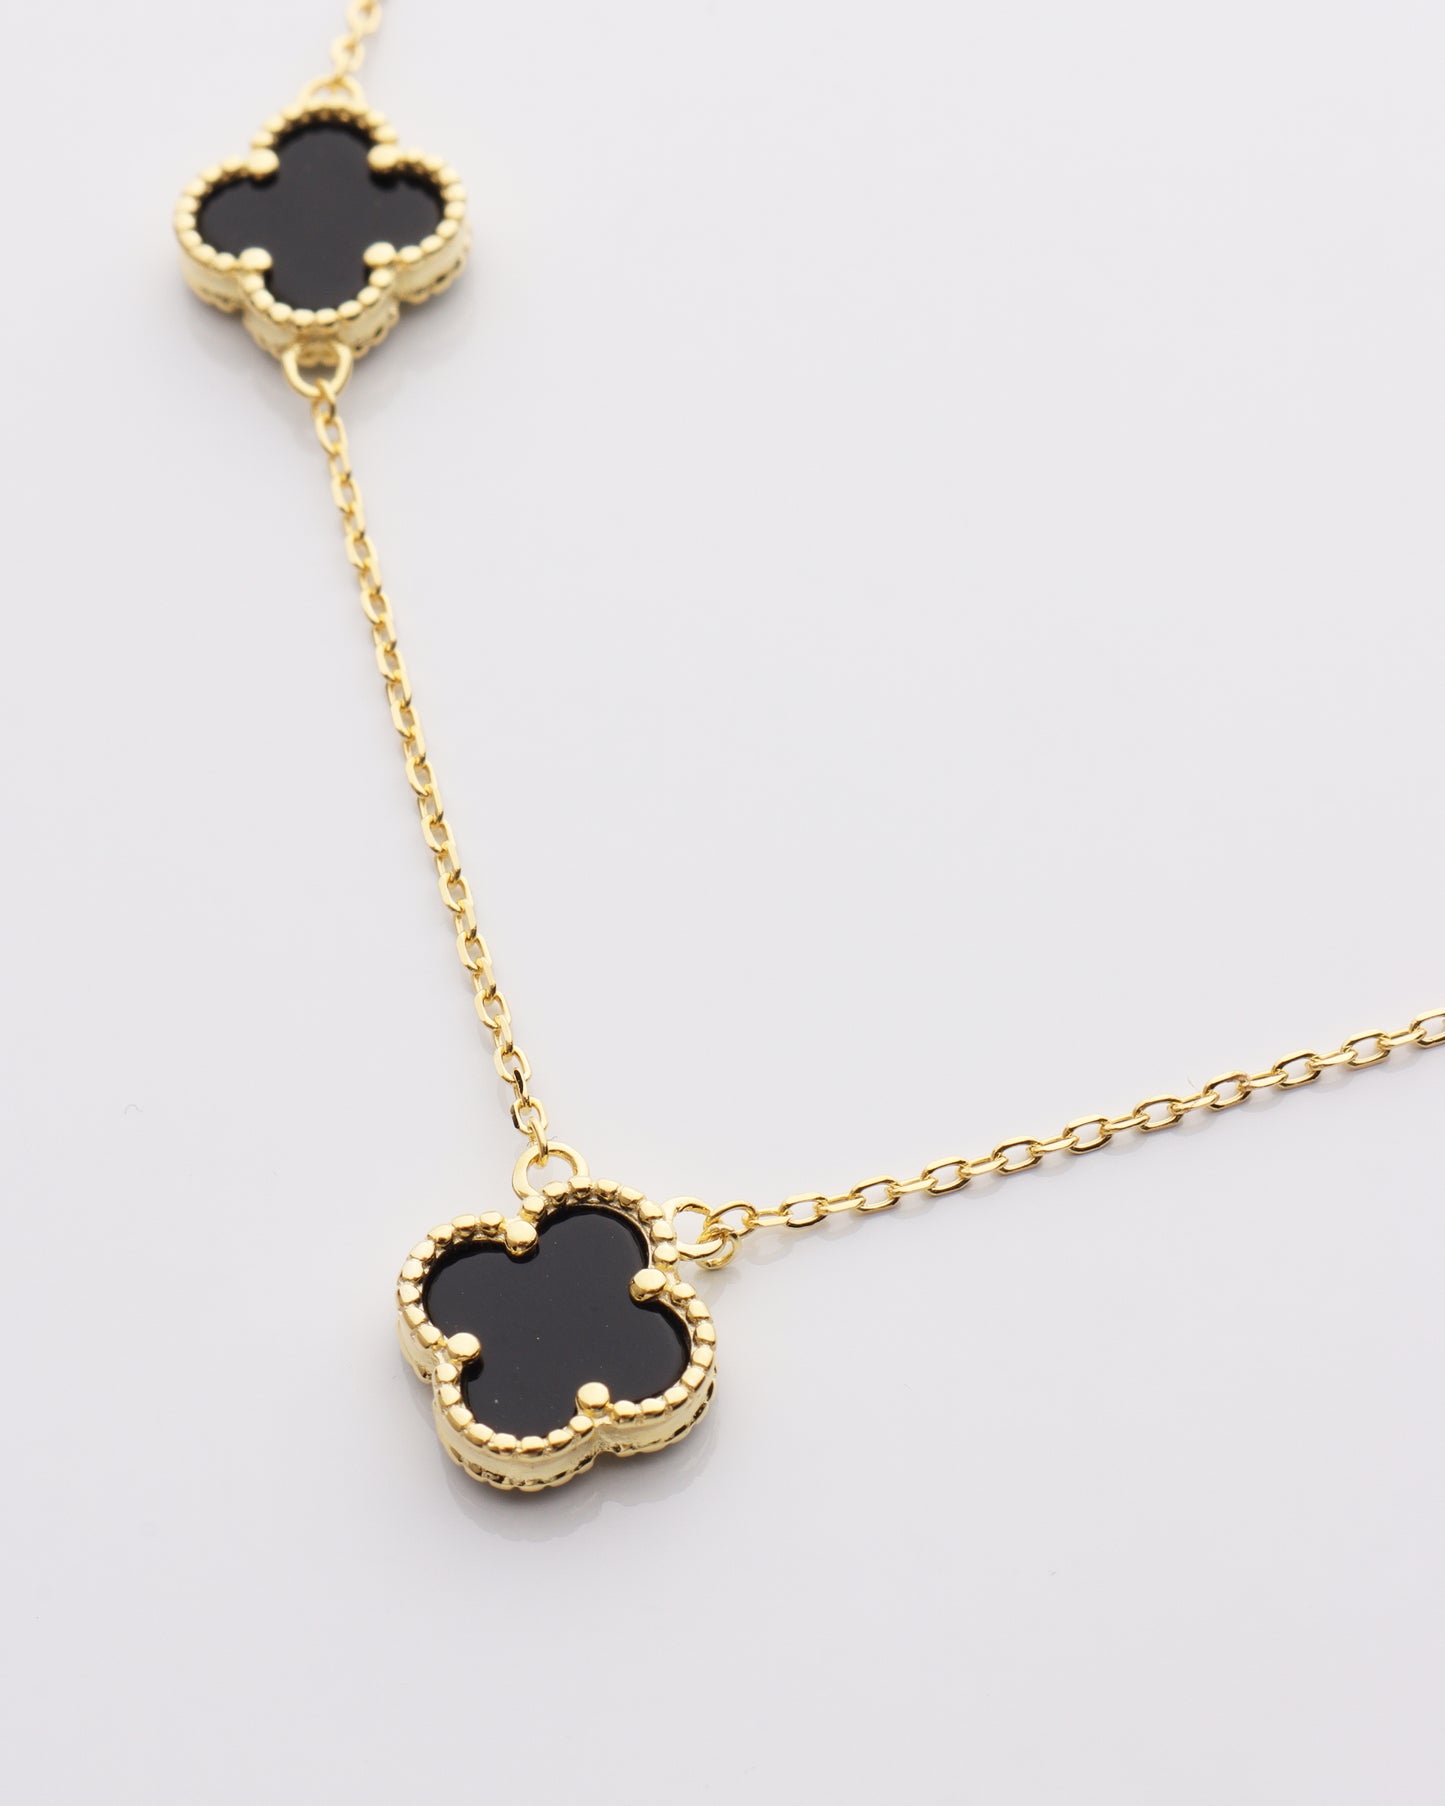 Triple Dainty Clover Necklace